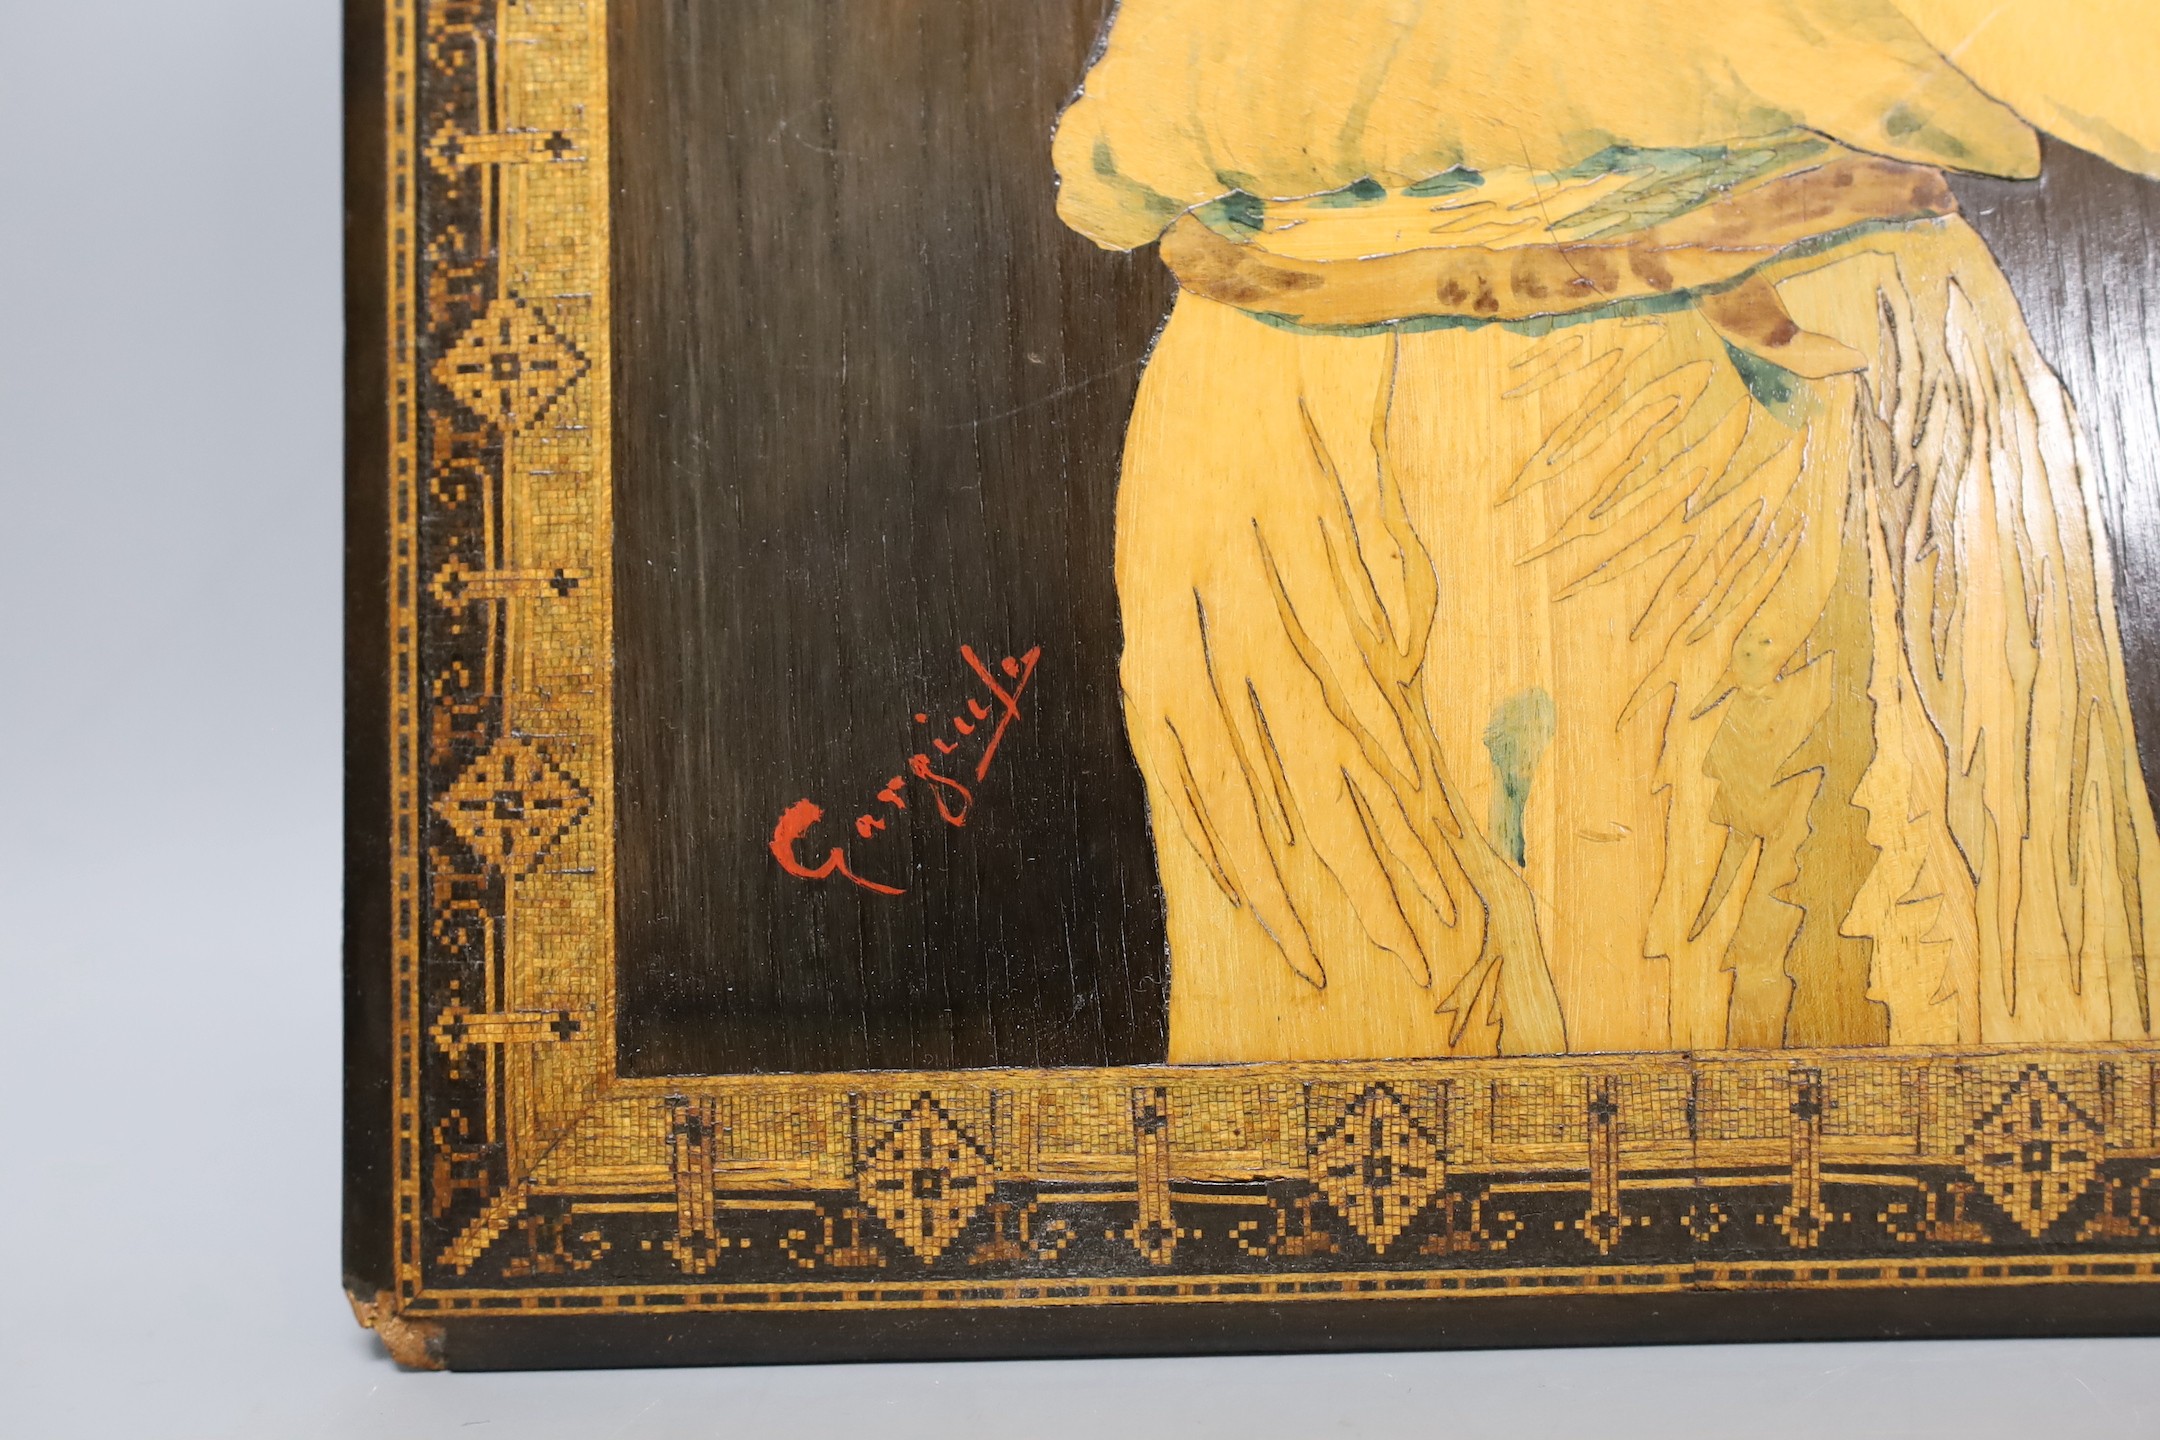 Two 19th century Sorento marquetry panels, both signed, San Remo and Gargiule, largest 38x26cm - Image 5 of 6